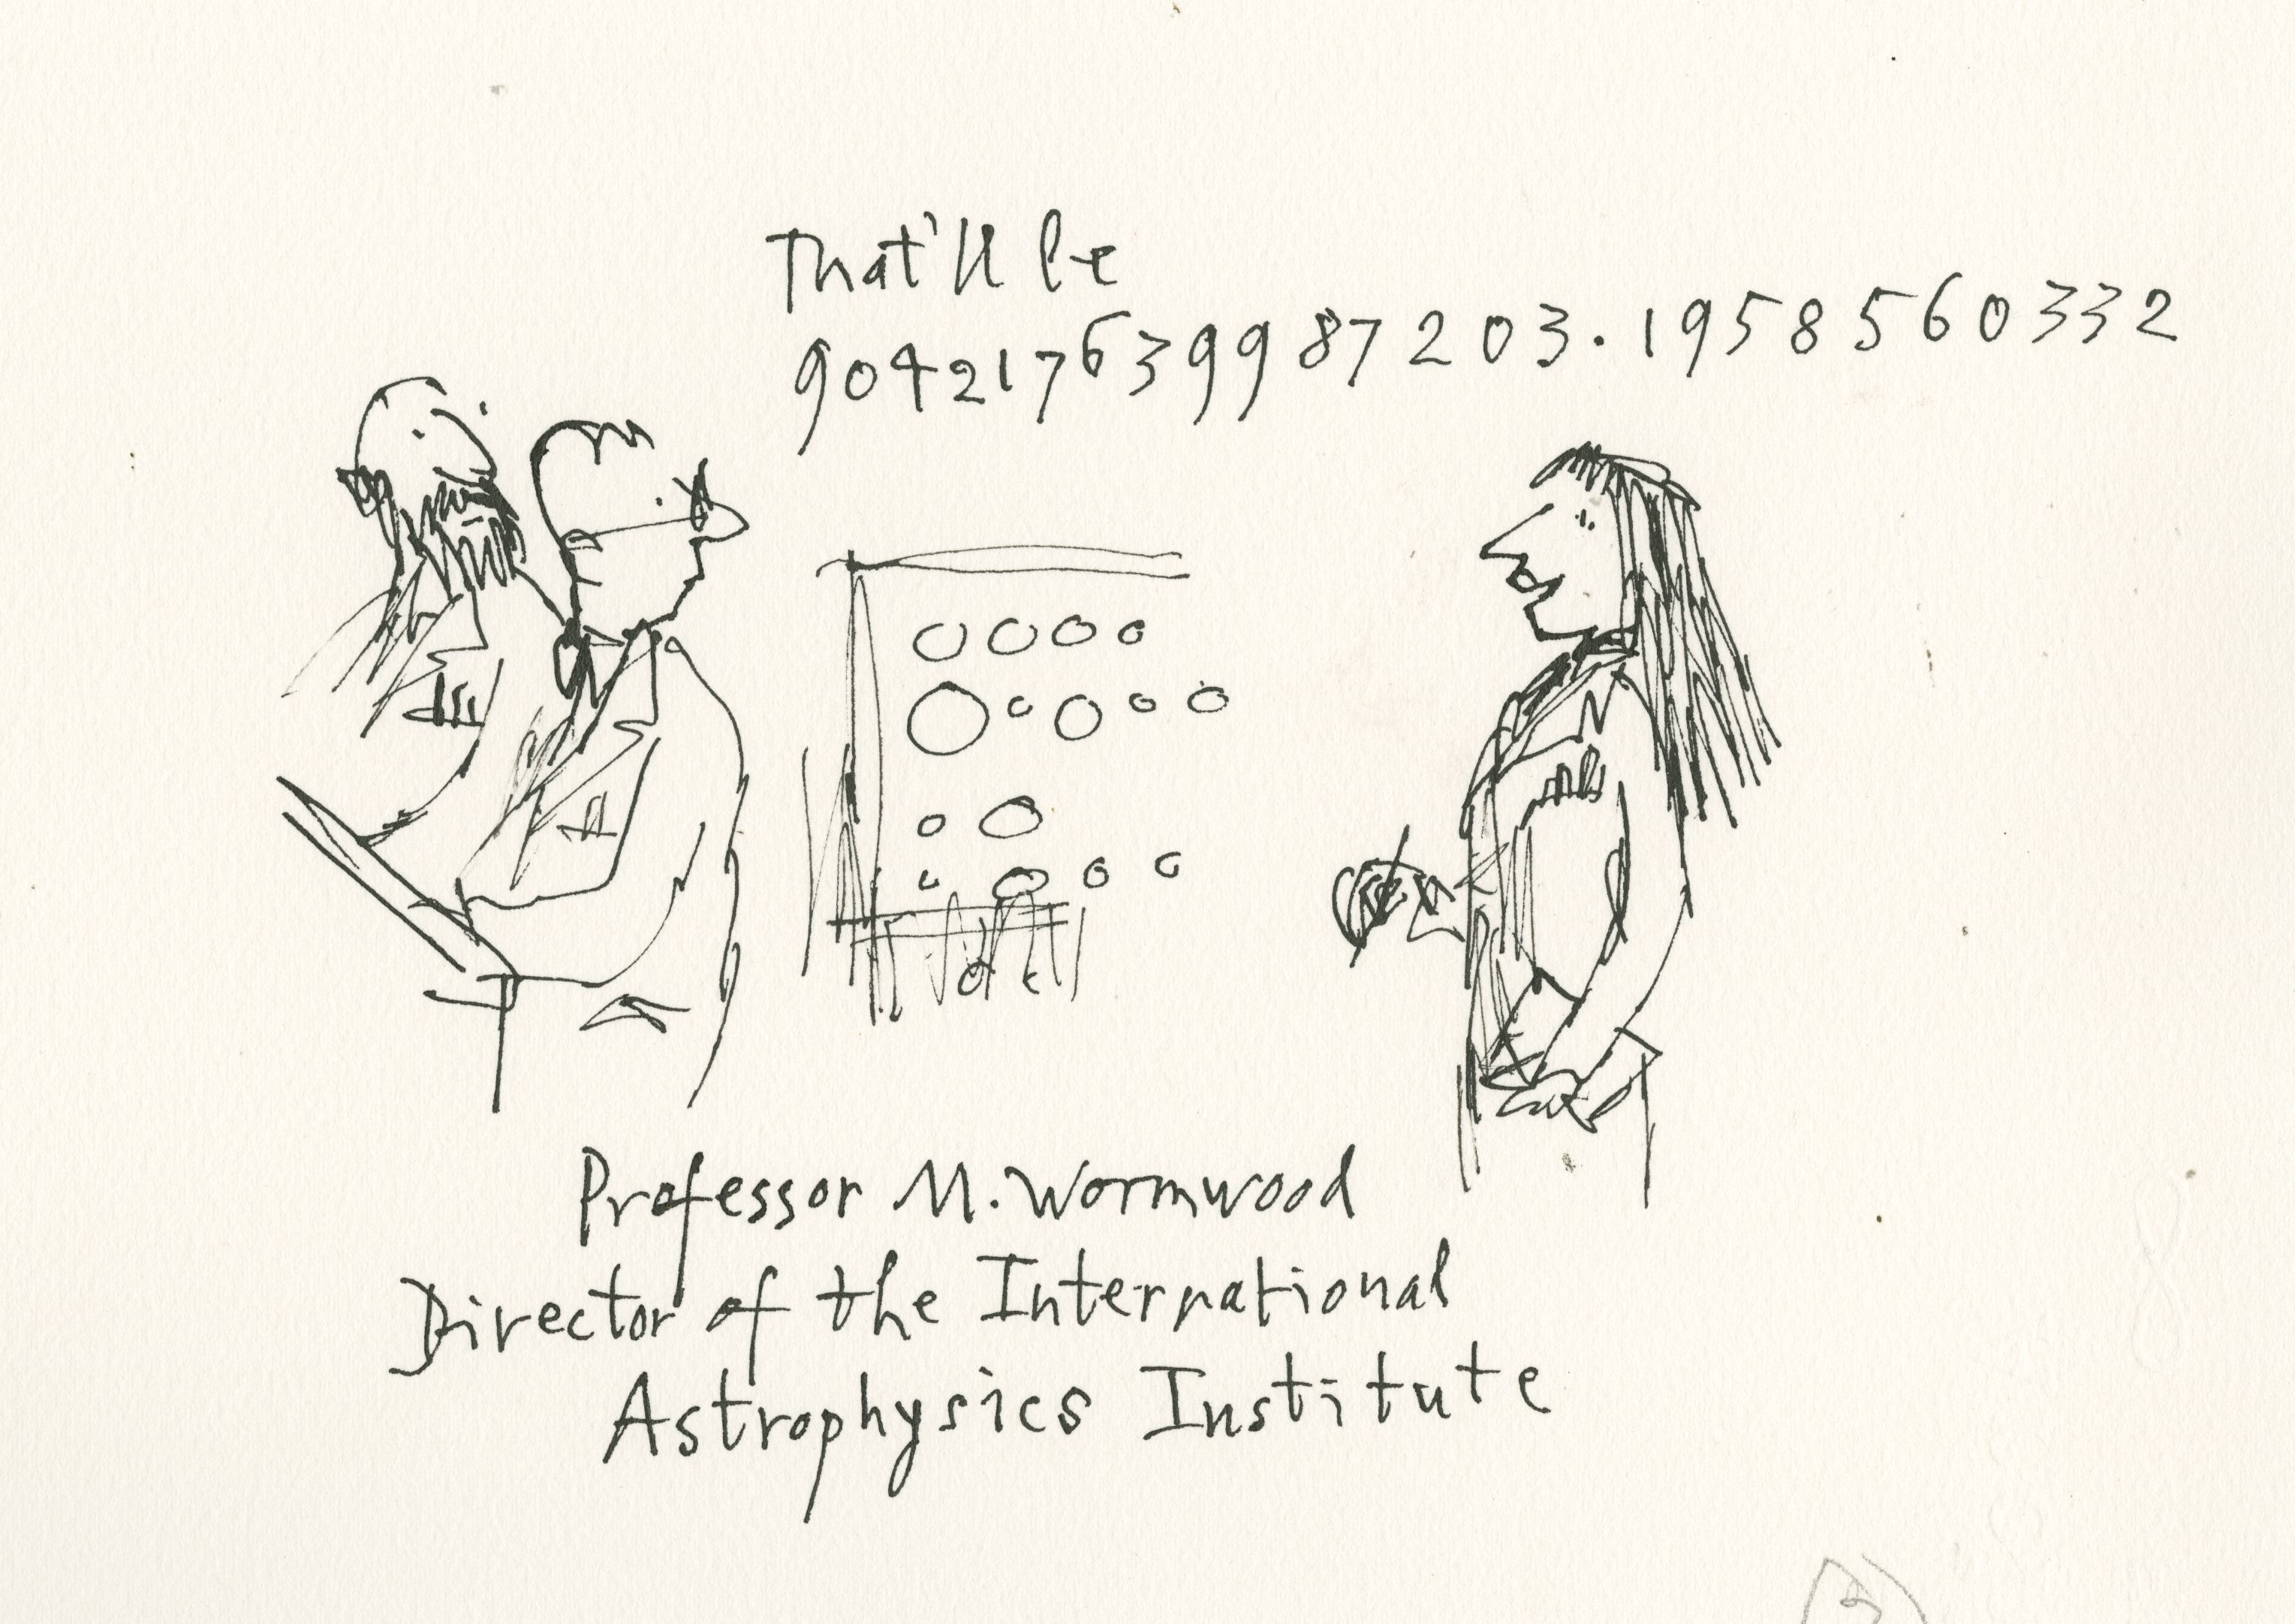 Matilda re-imagined as an astrophysicist for the 30th anniversary, by Quentin Blake